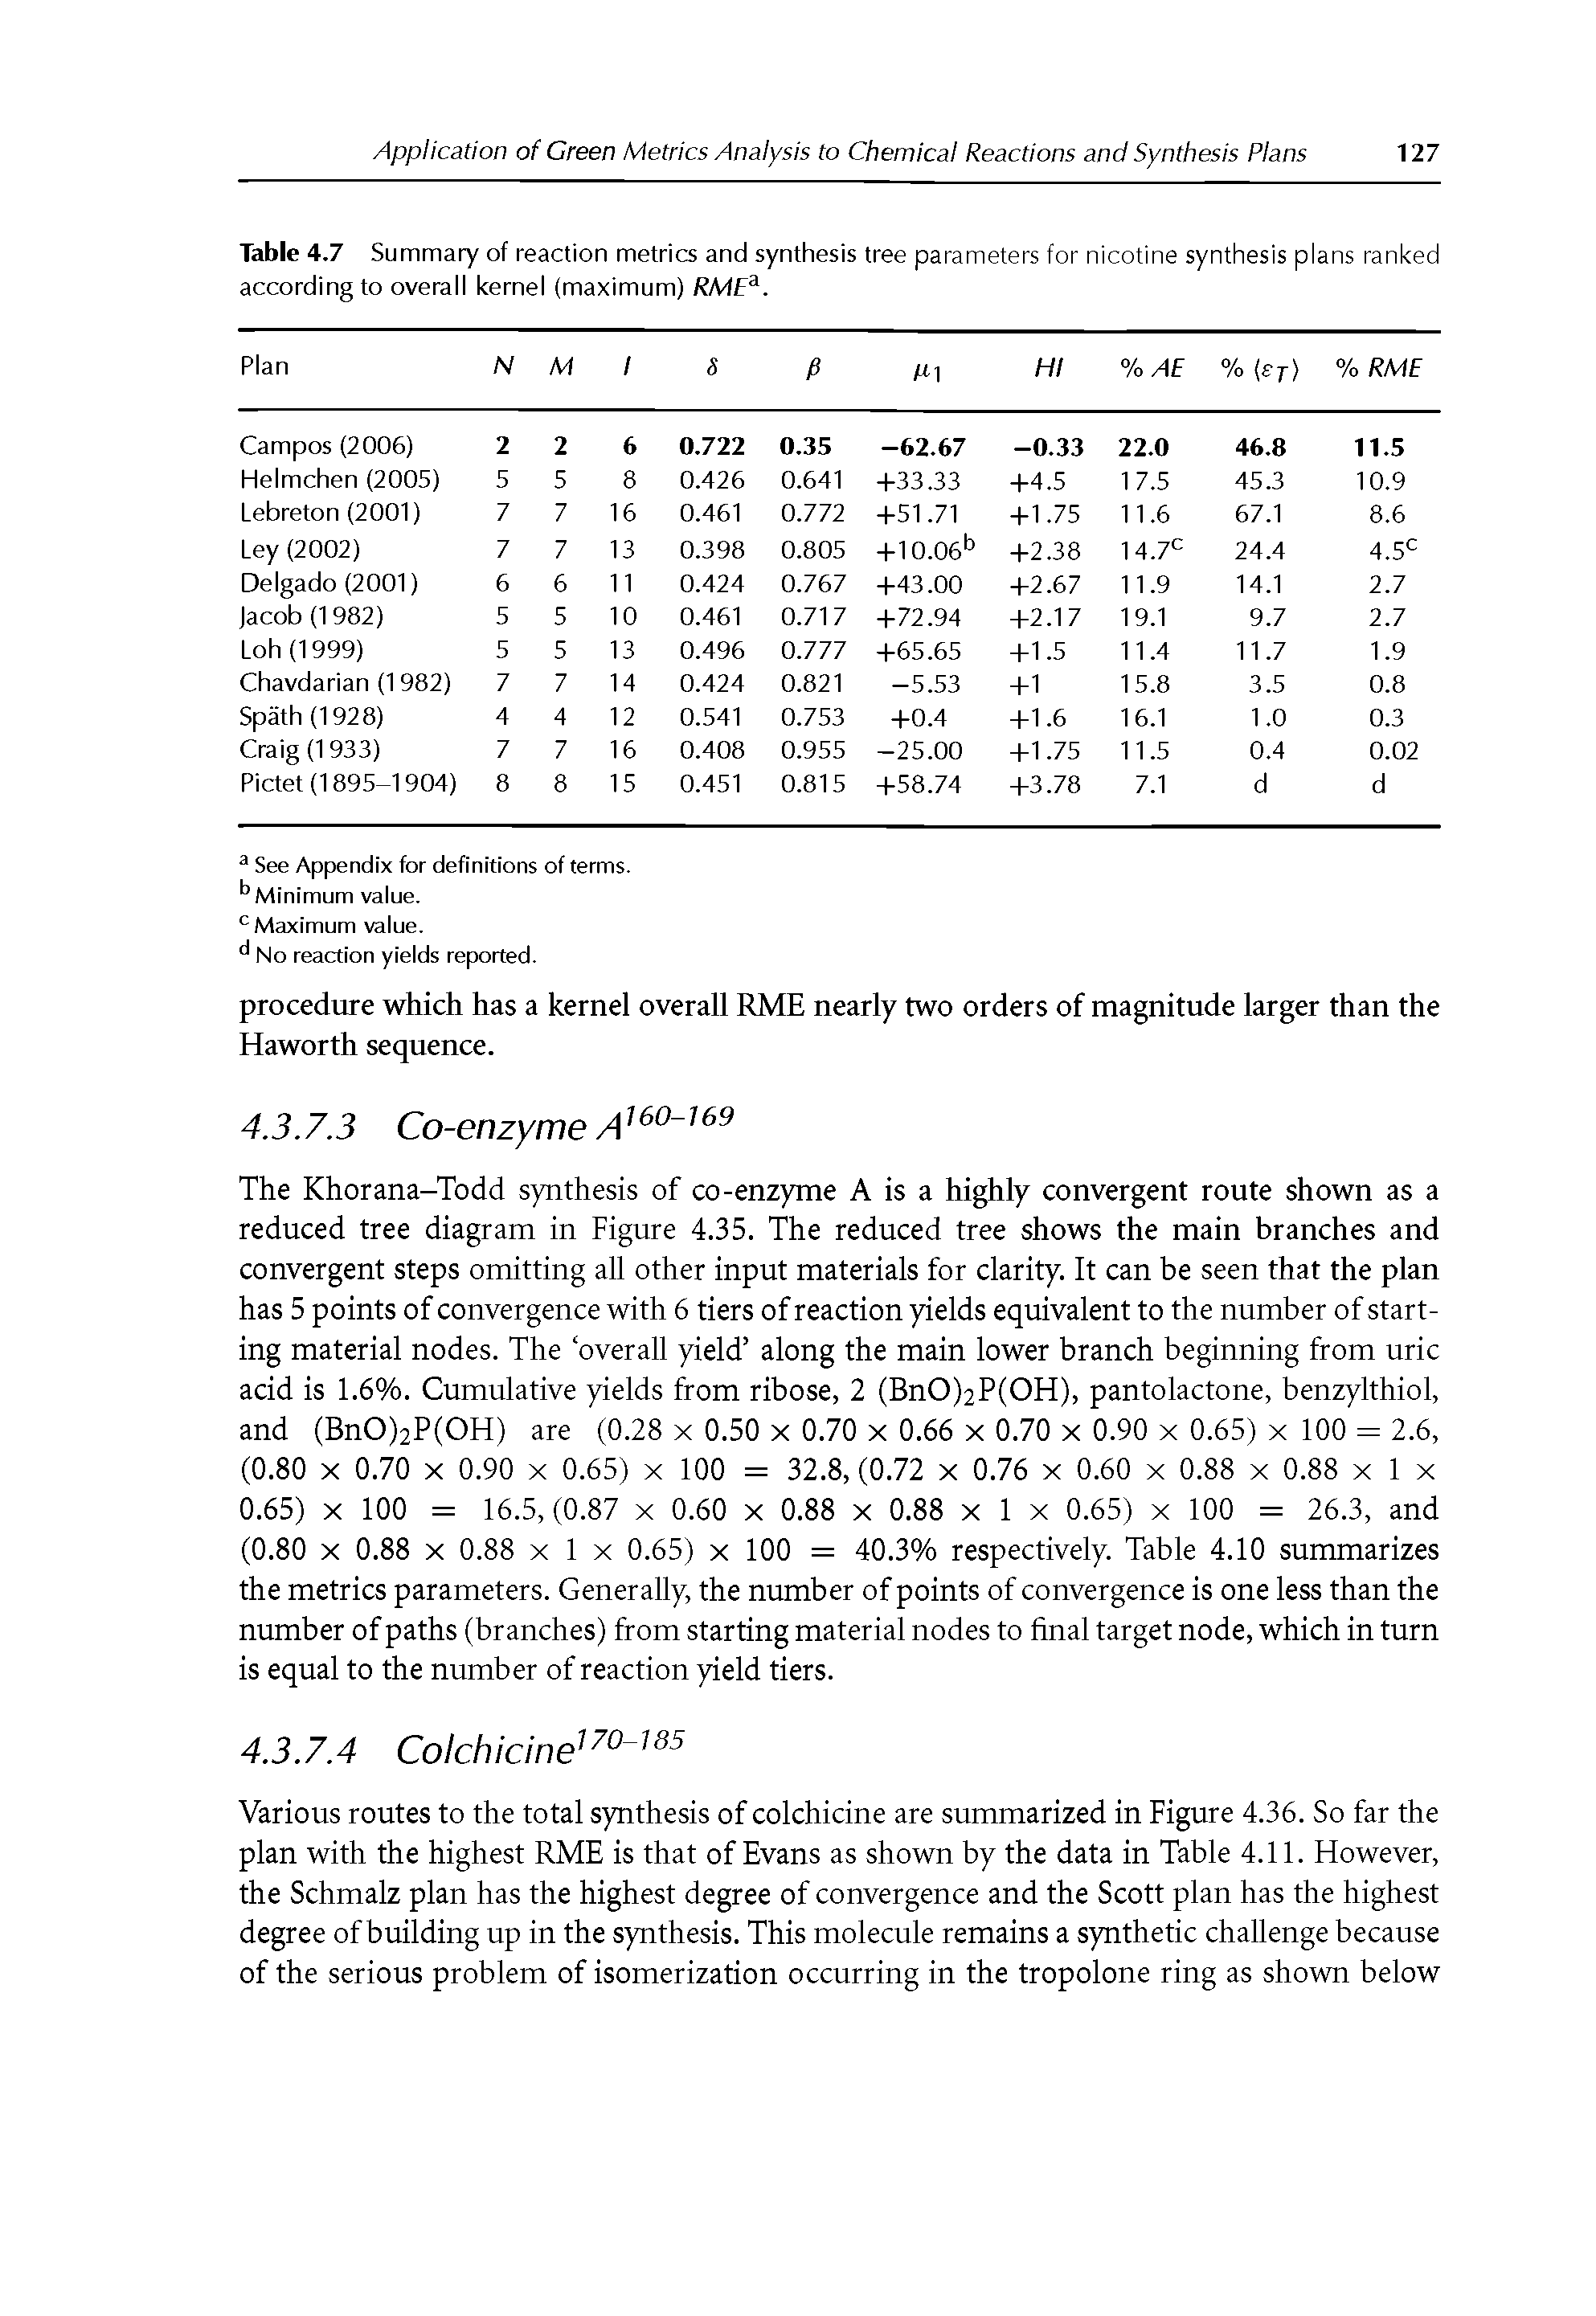 Table 4.7 Summary of reaction metrics and synthesis according to overall kernel (maximum) RME. tree parameters for nicotine synthesis plans ranked ...